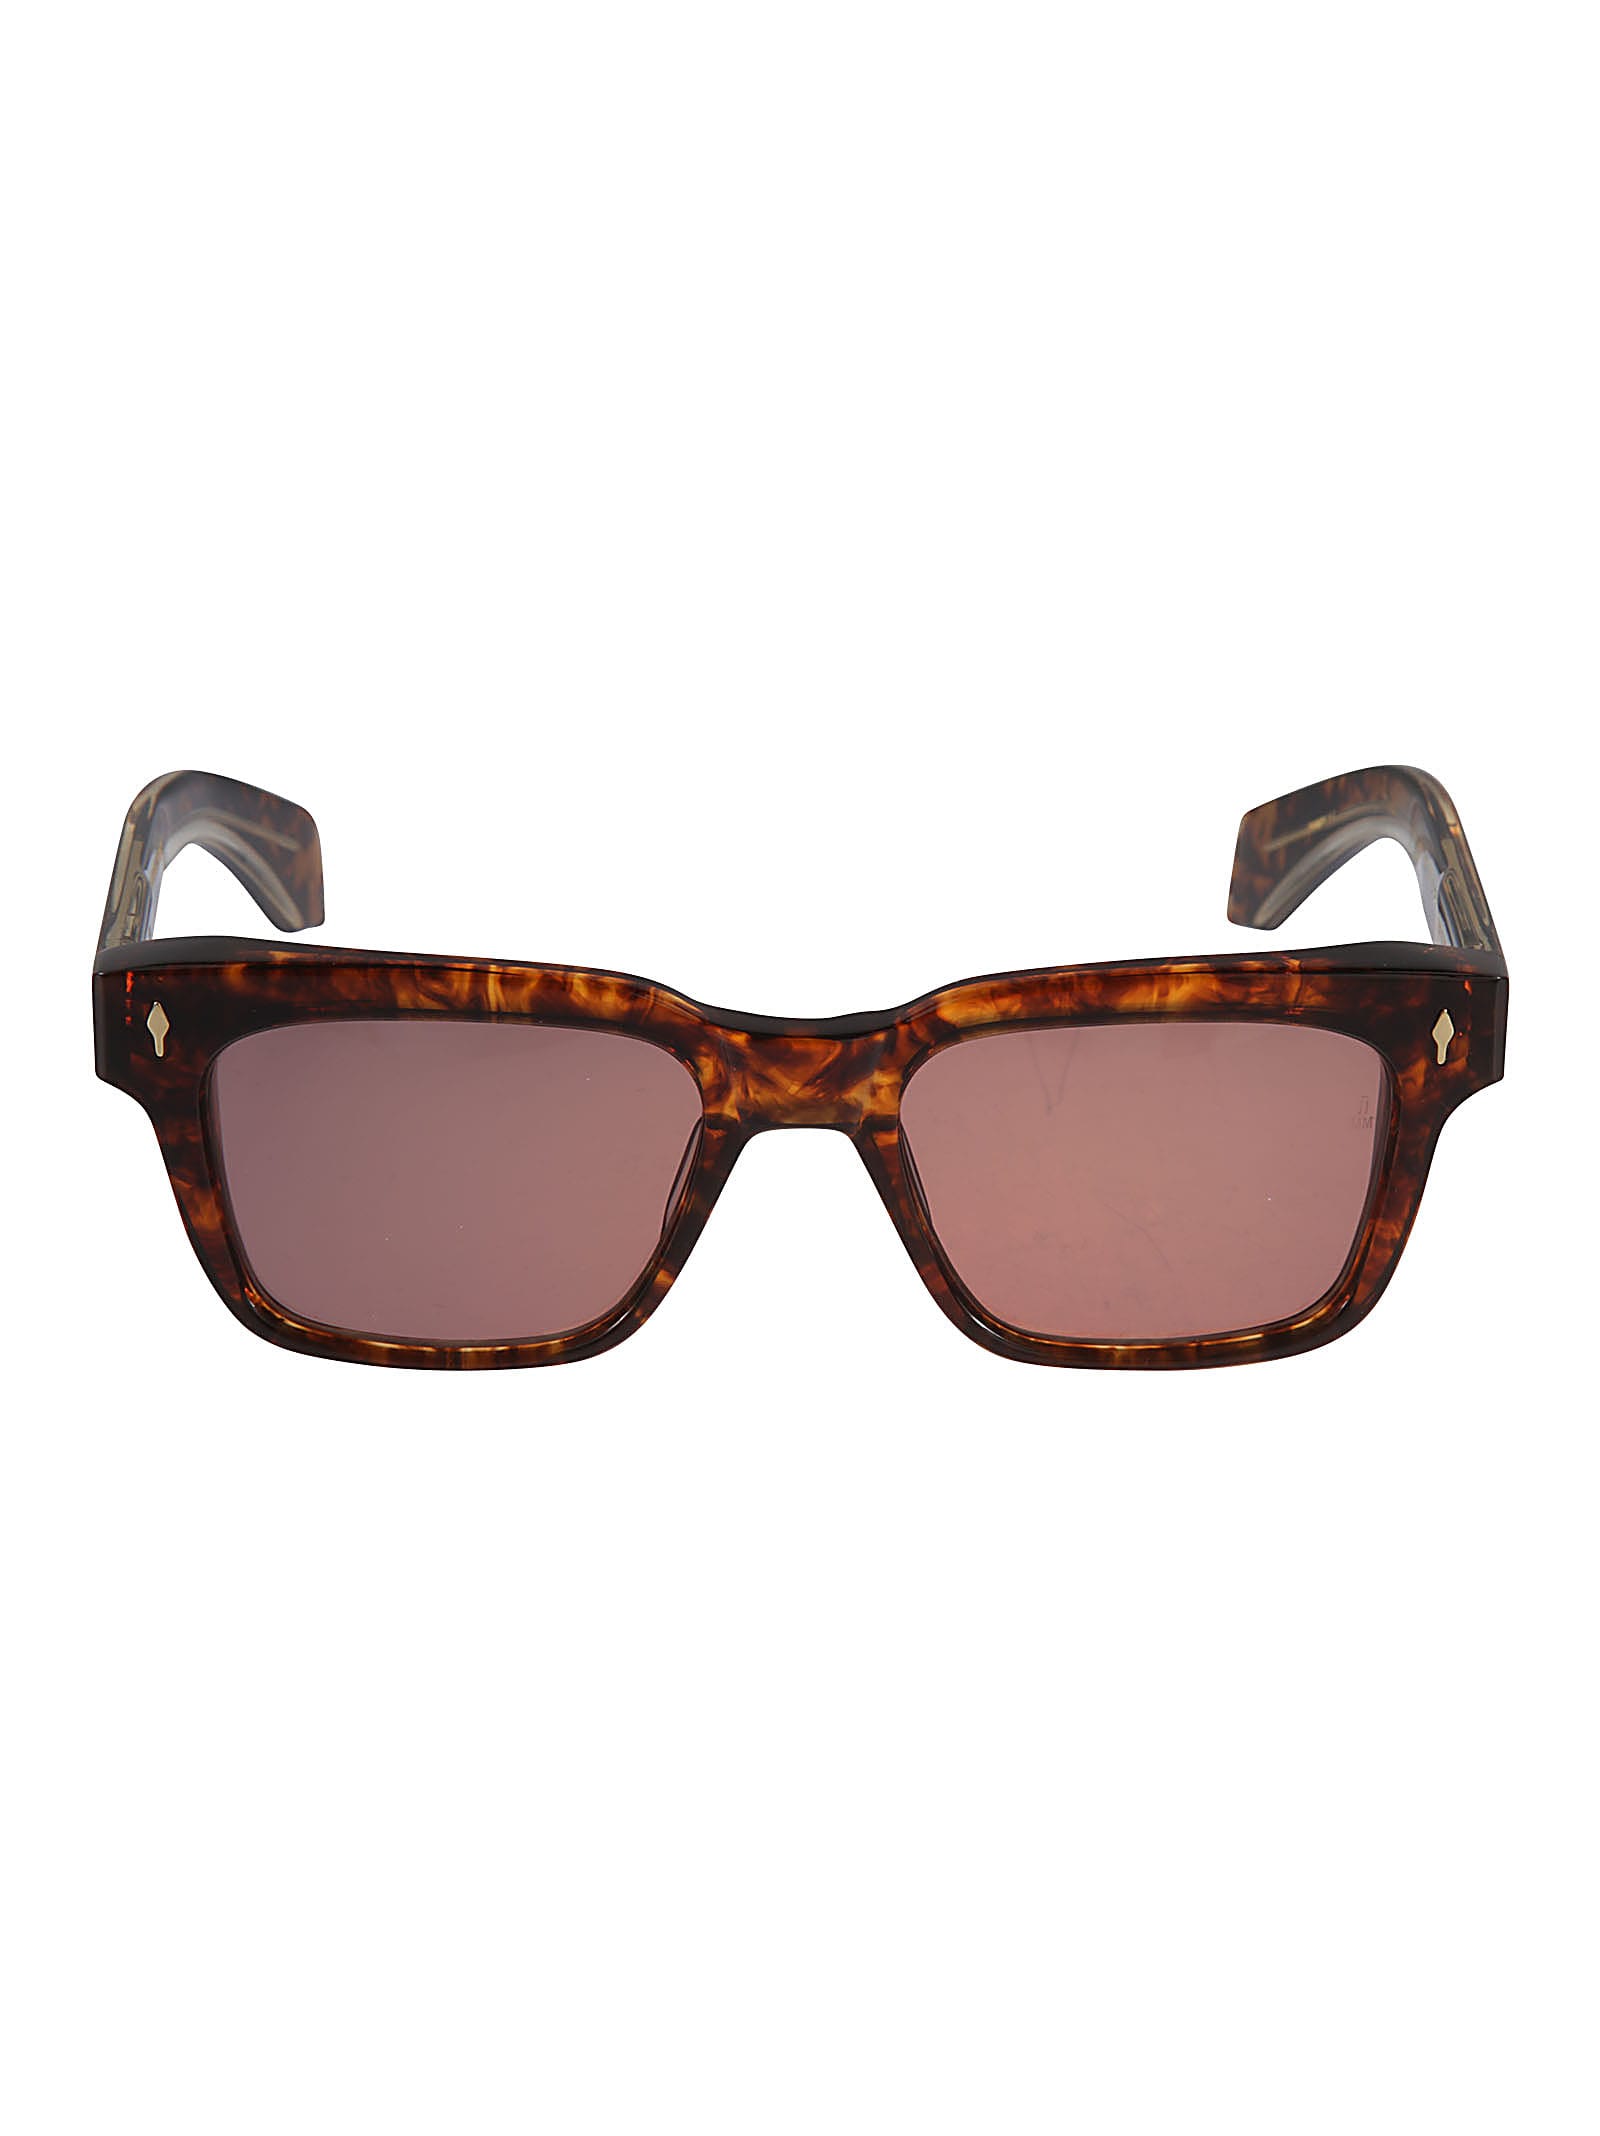 Jacques Marie Mage Engraved Logo Sunglasses